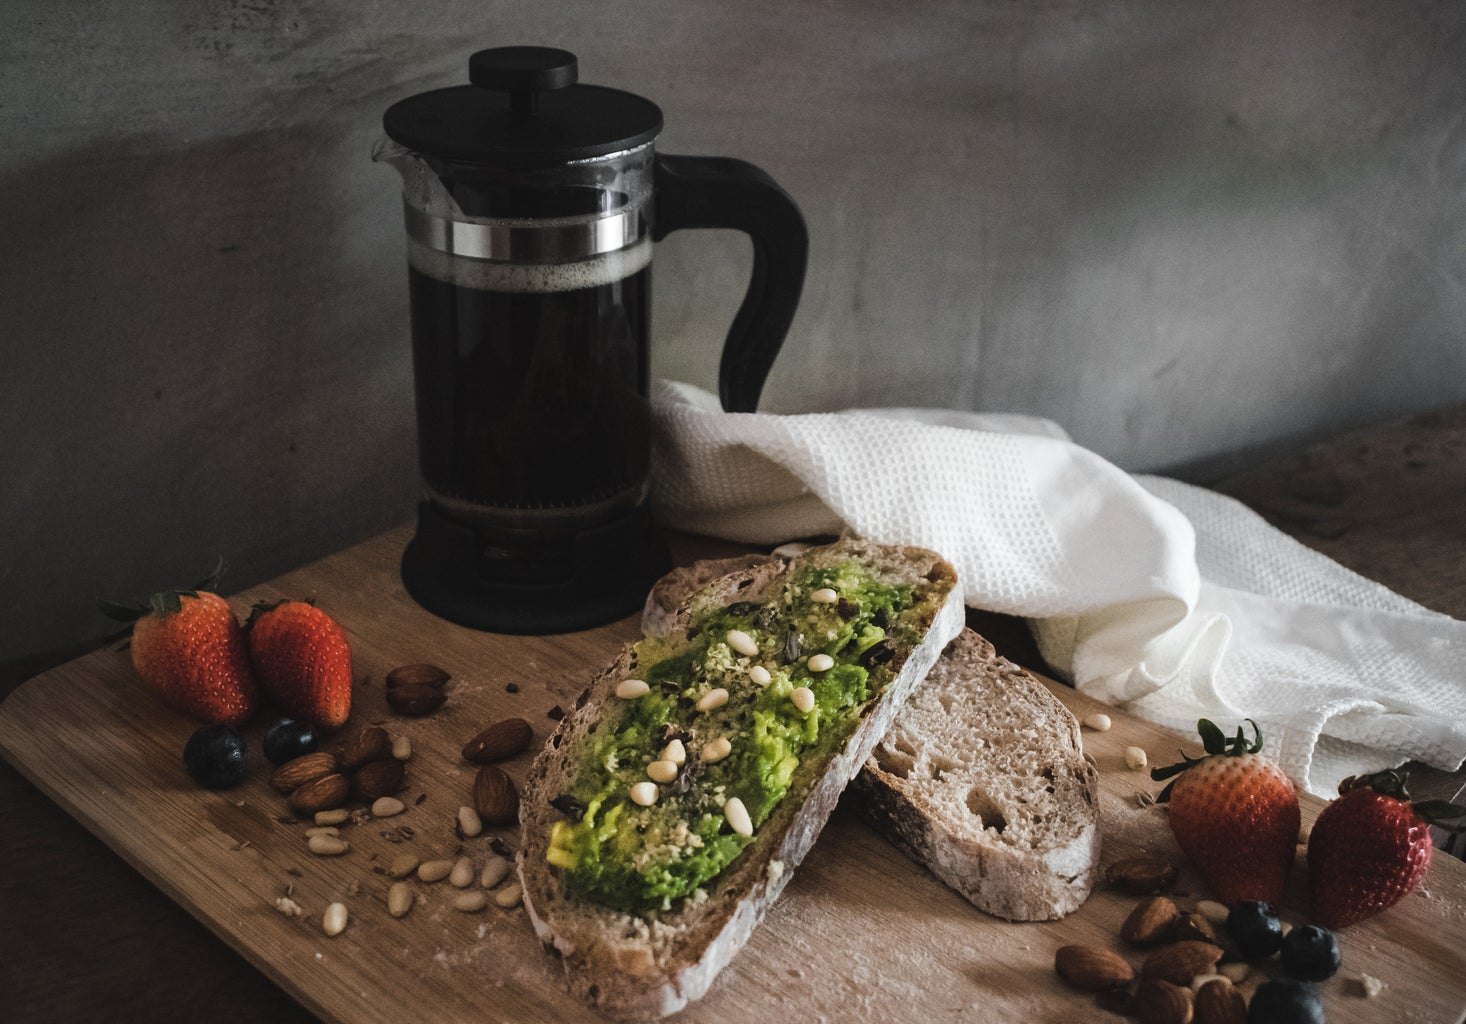 Avocado toast, fruits and nuts, and coffee.